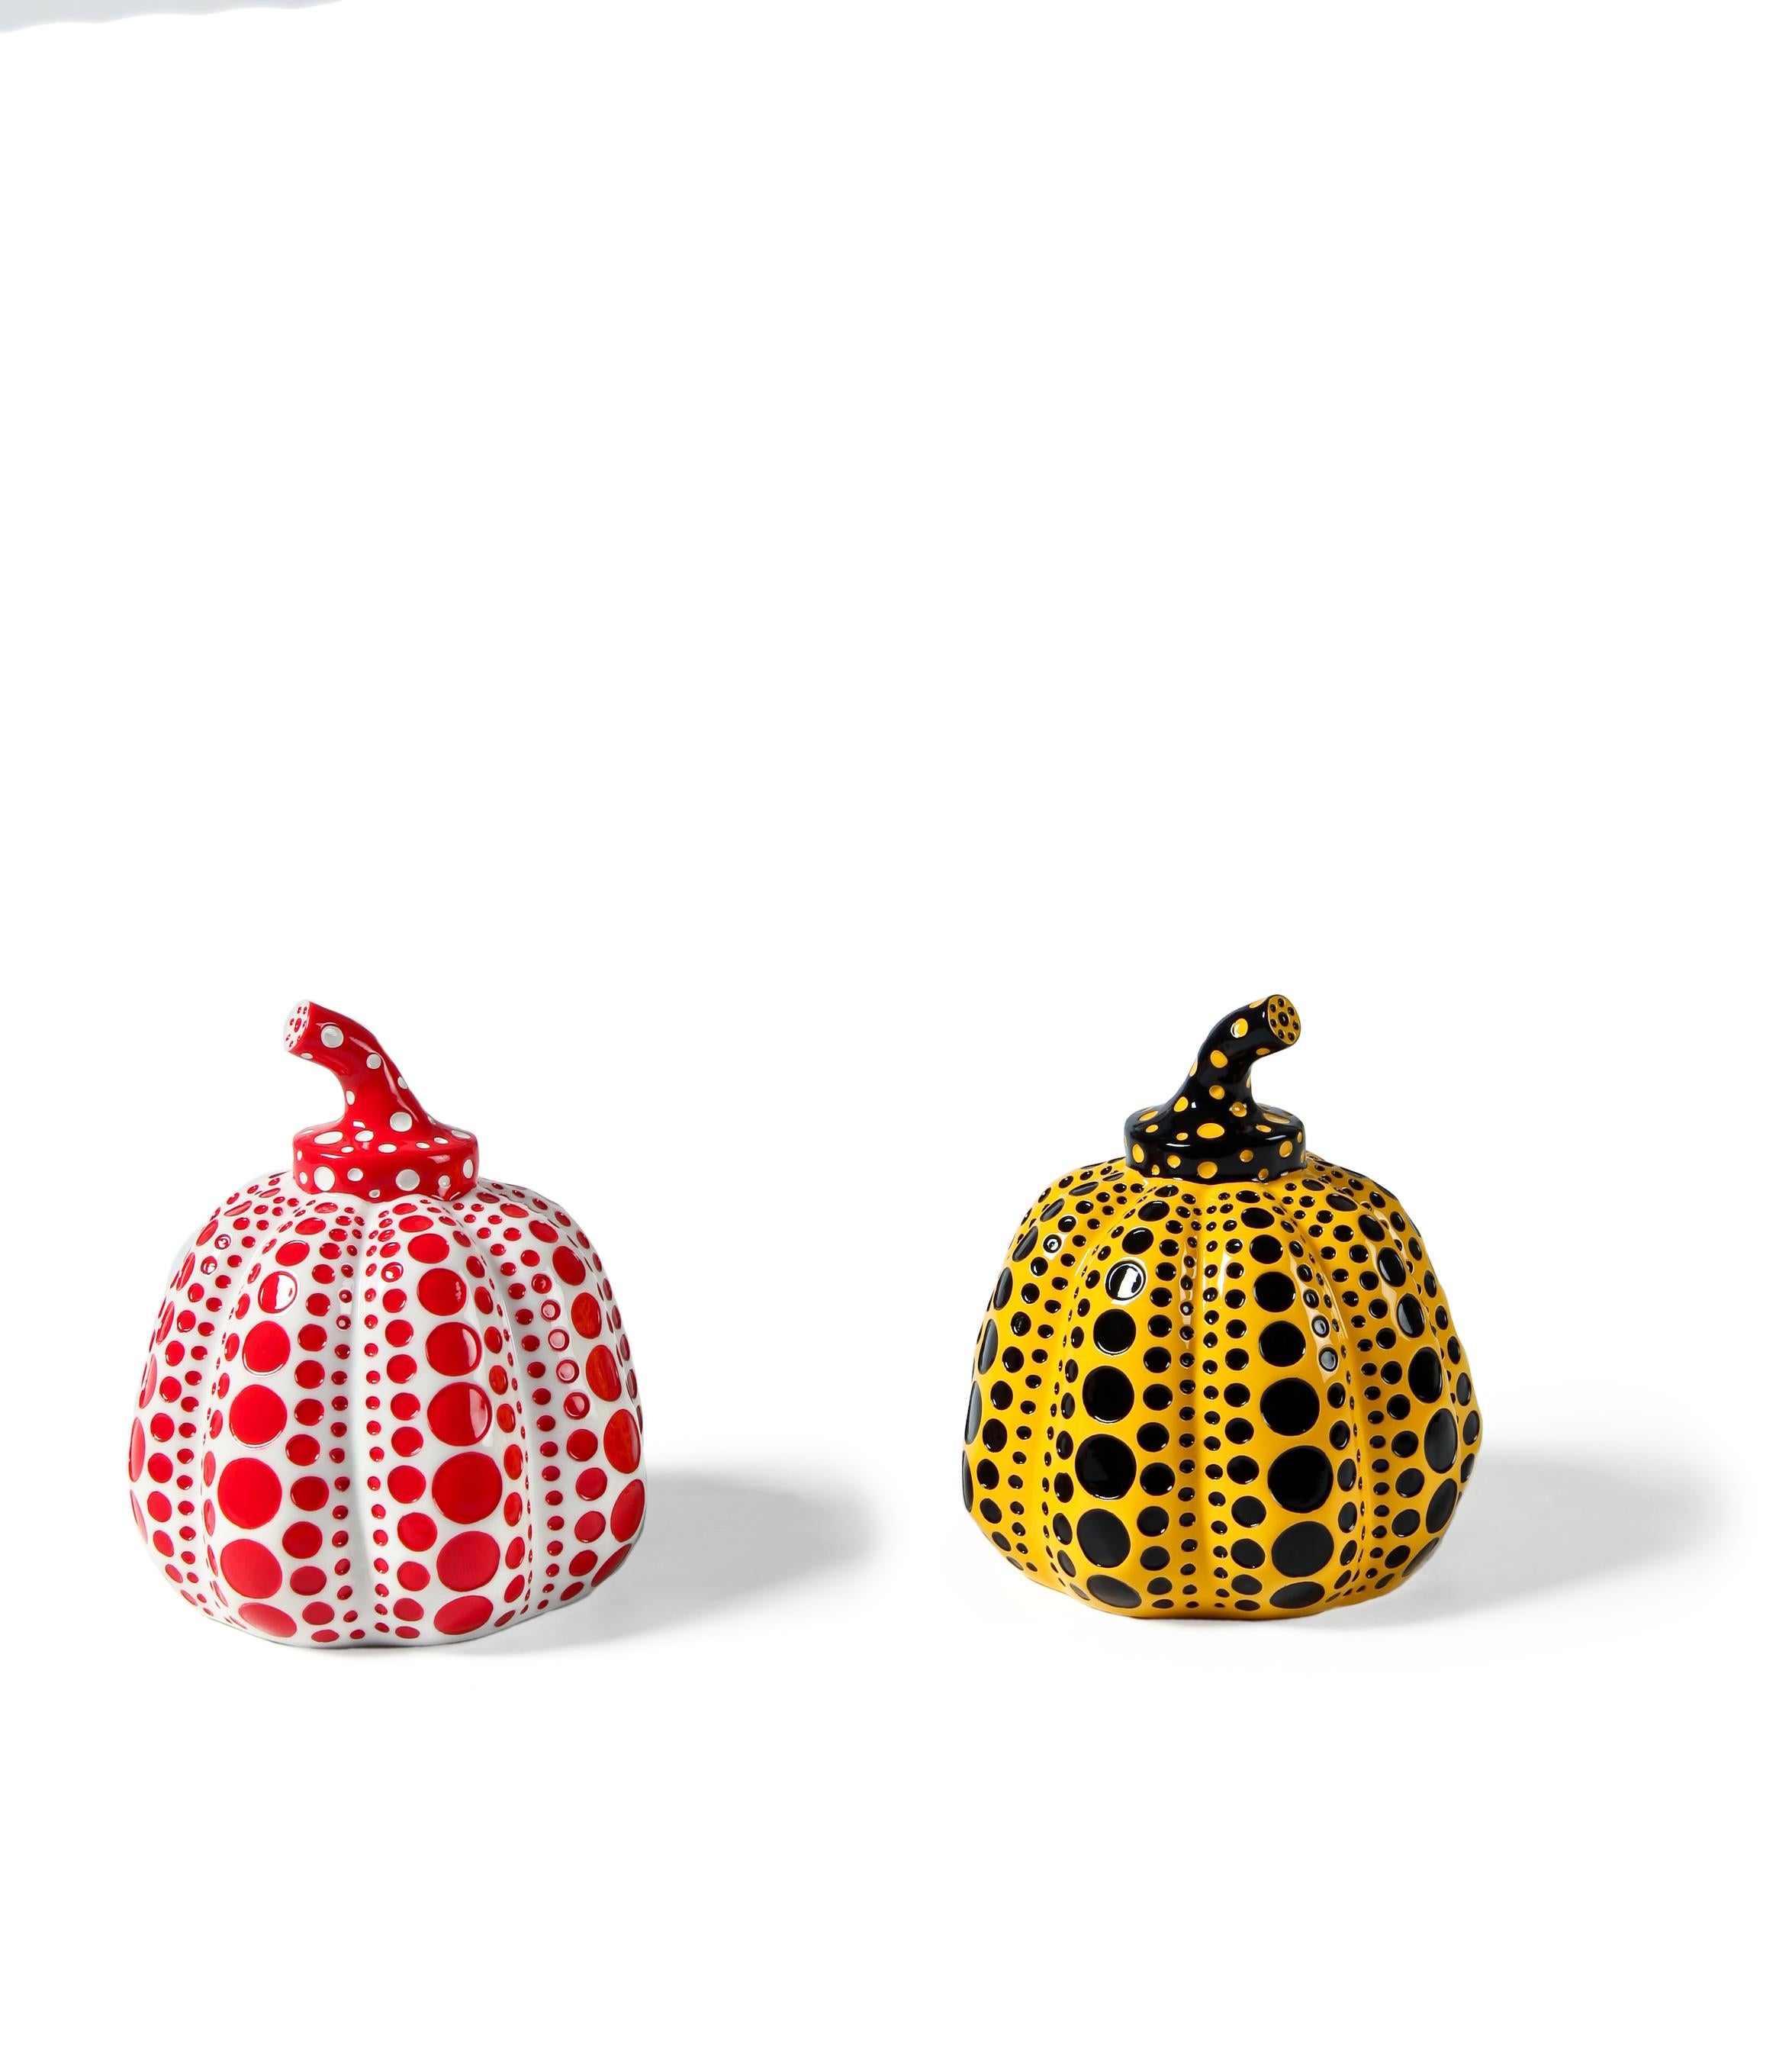 Pumpkin Object (White) & Pumpkin Object (Yellow), 2016 
Yayoi Kusama

The set of two painted cast resin multiples
Each stamped on the base
Accompanied by the original boxes
Diameter: 7.5 cm (3 in)
Height: 9.5 cm (3.7 in)
Box: 10.6 × 12.4 × 12.4 cm